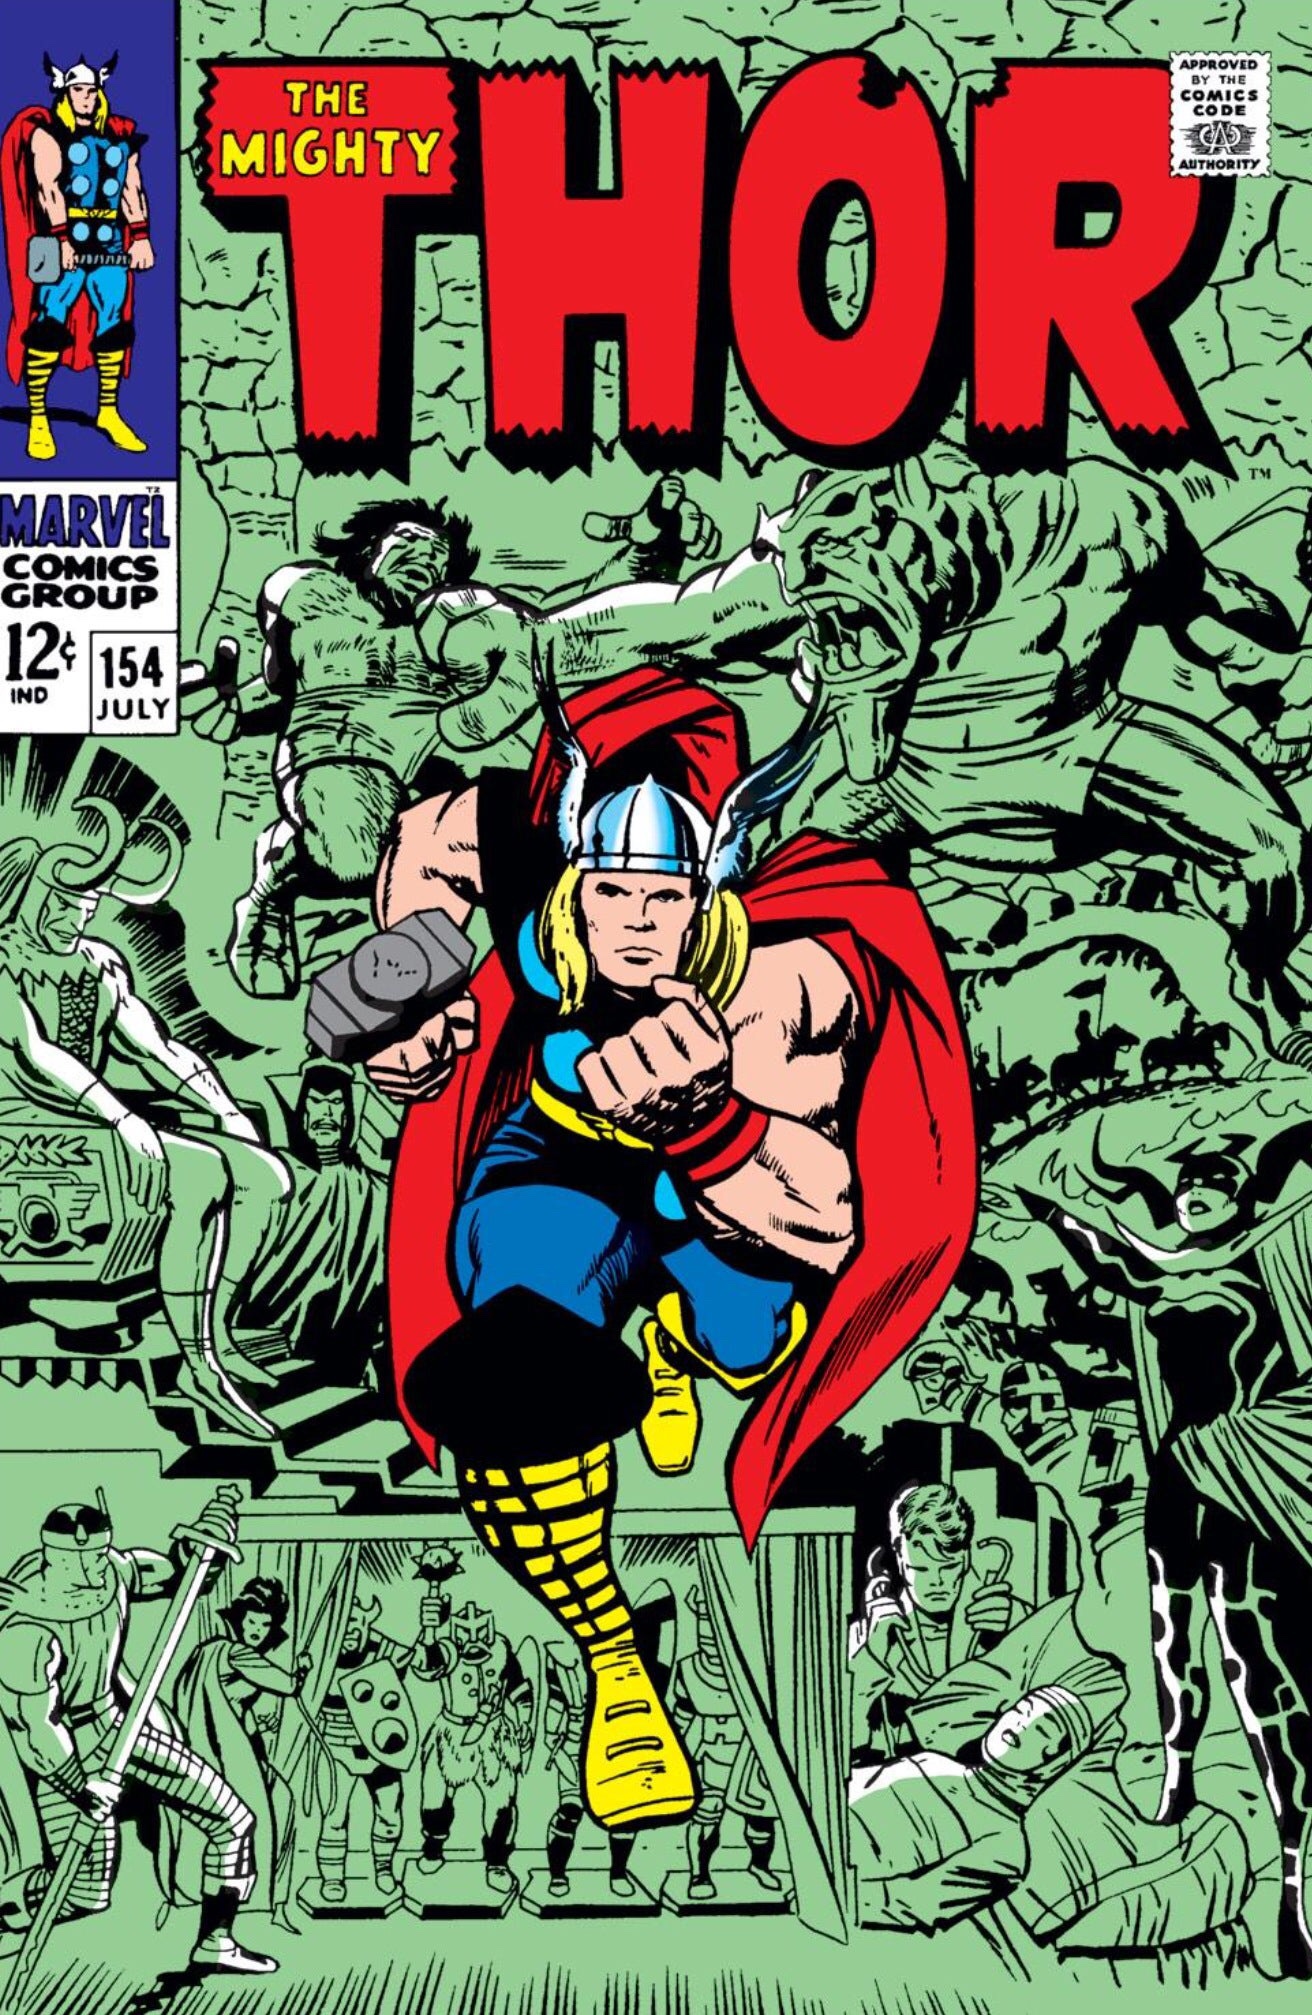 Thor #154 Cover by Jack Kirby and Vince Colletta